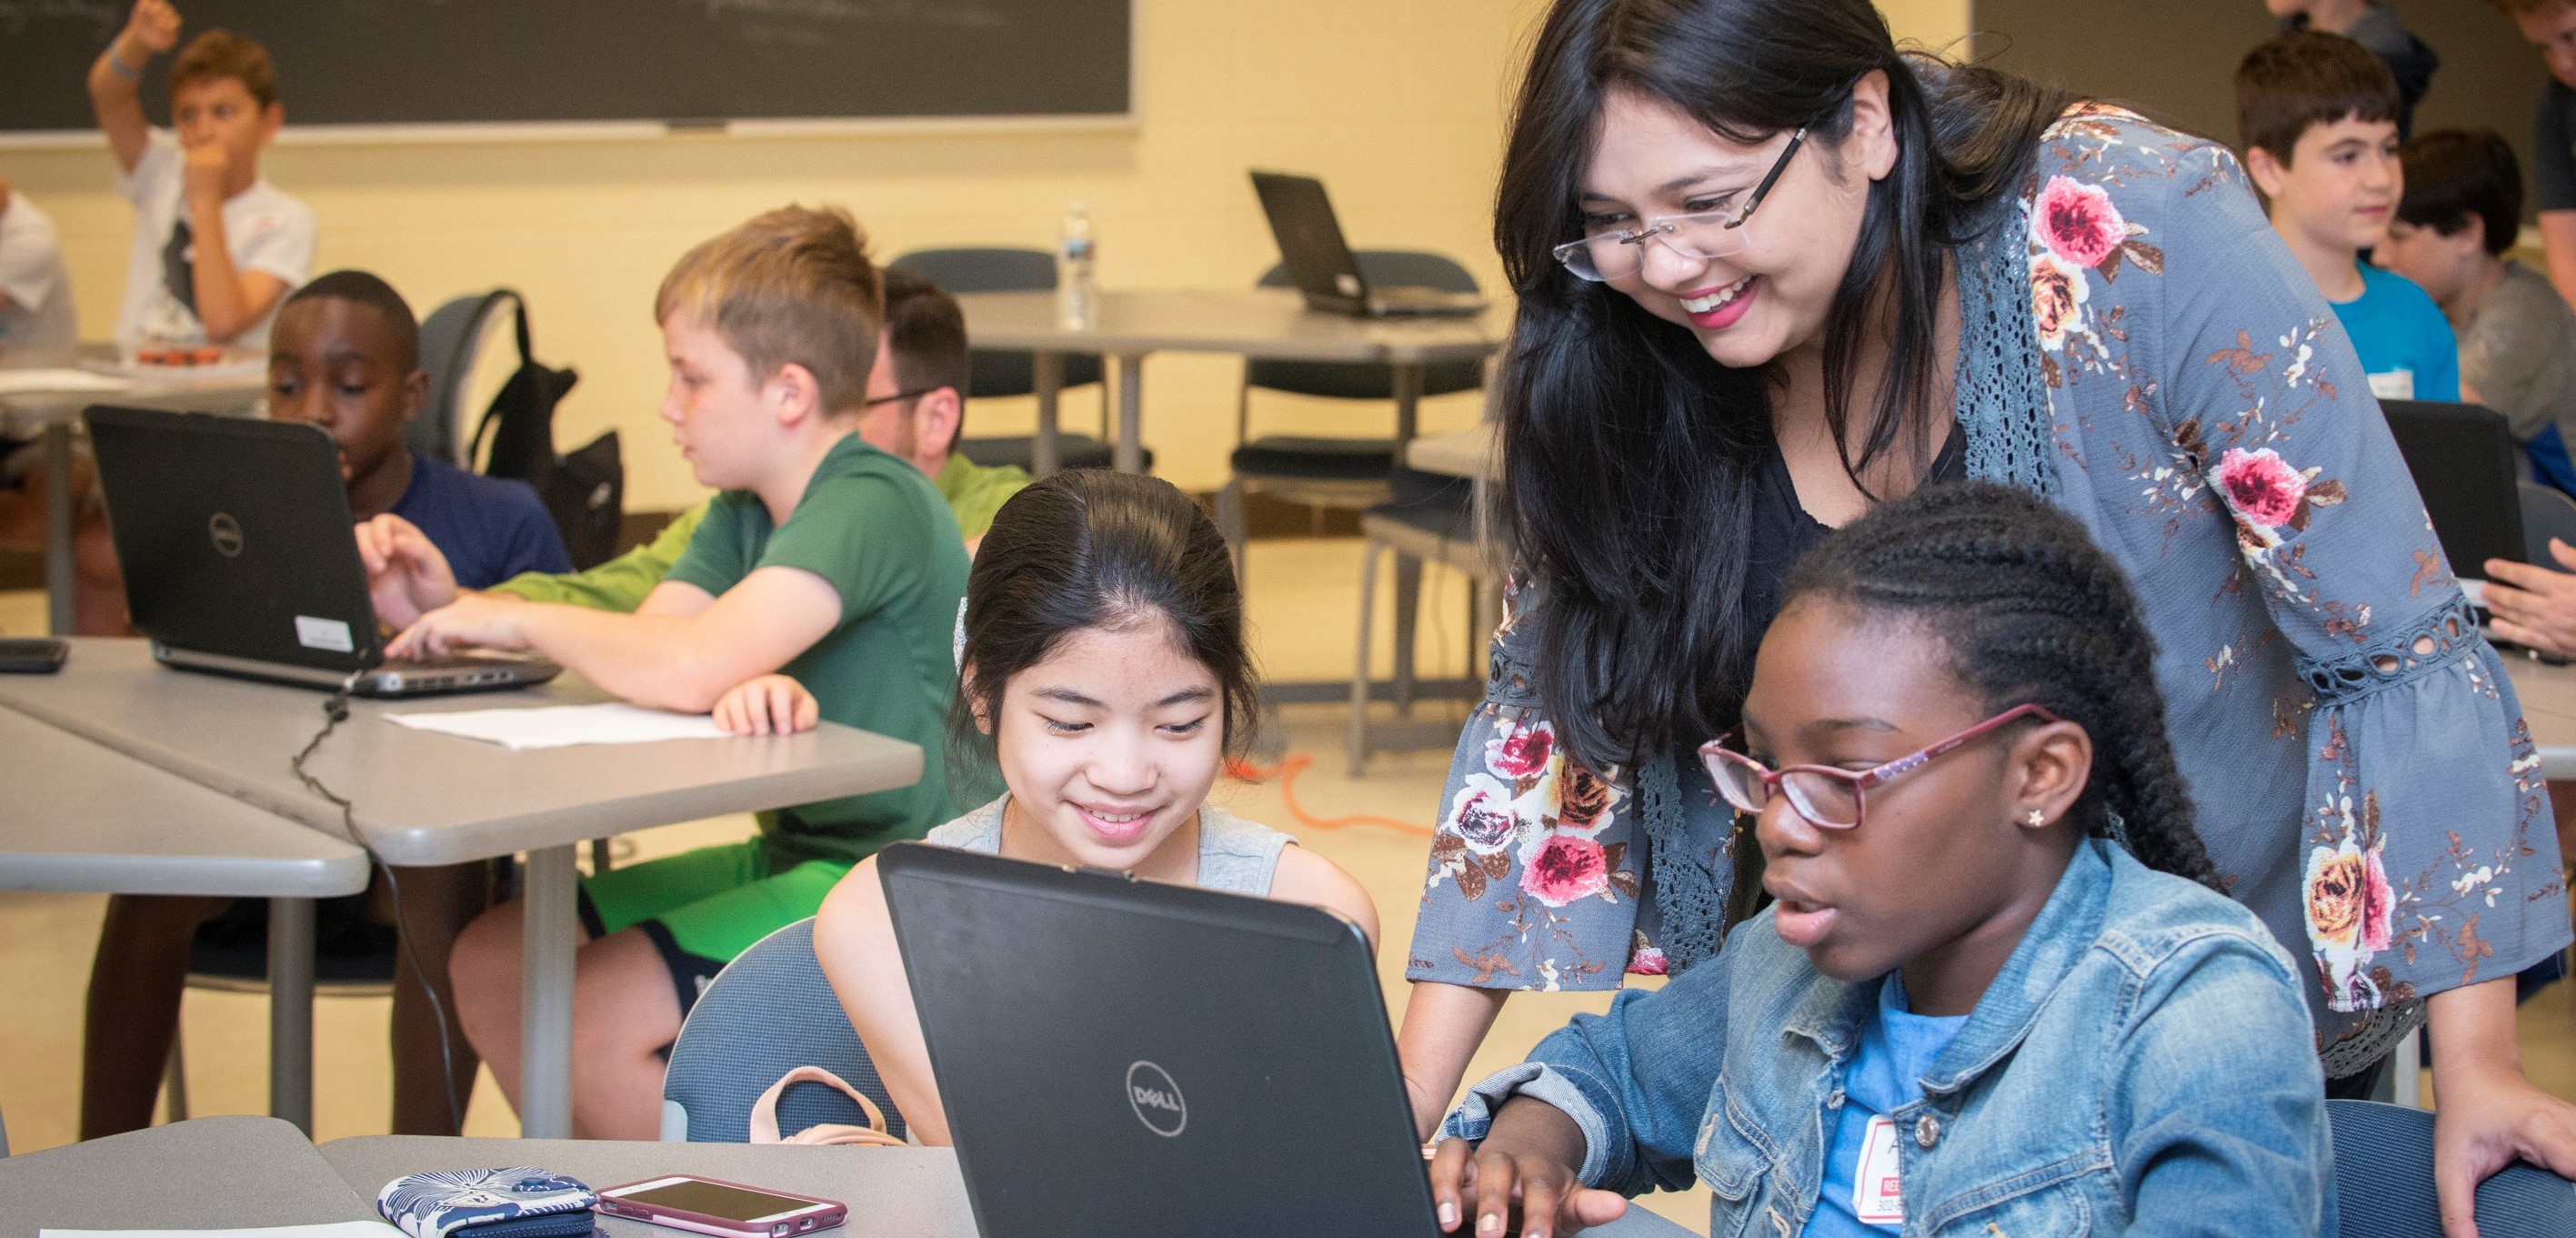 Teacher helps students at a table with a computer coding project.